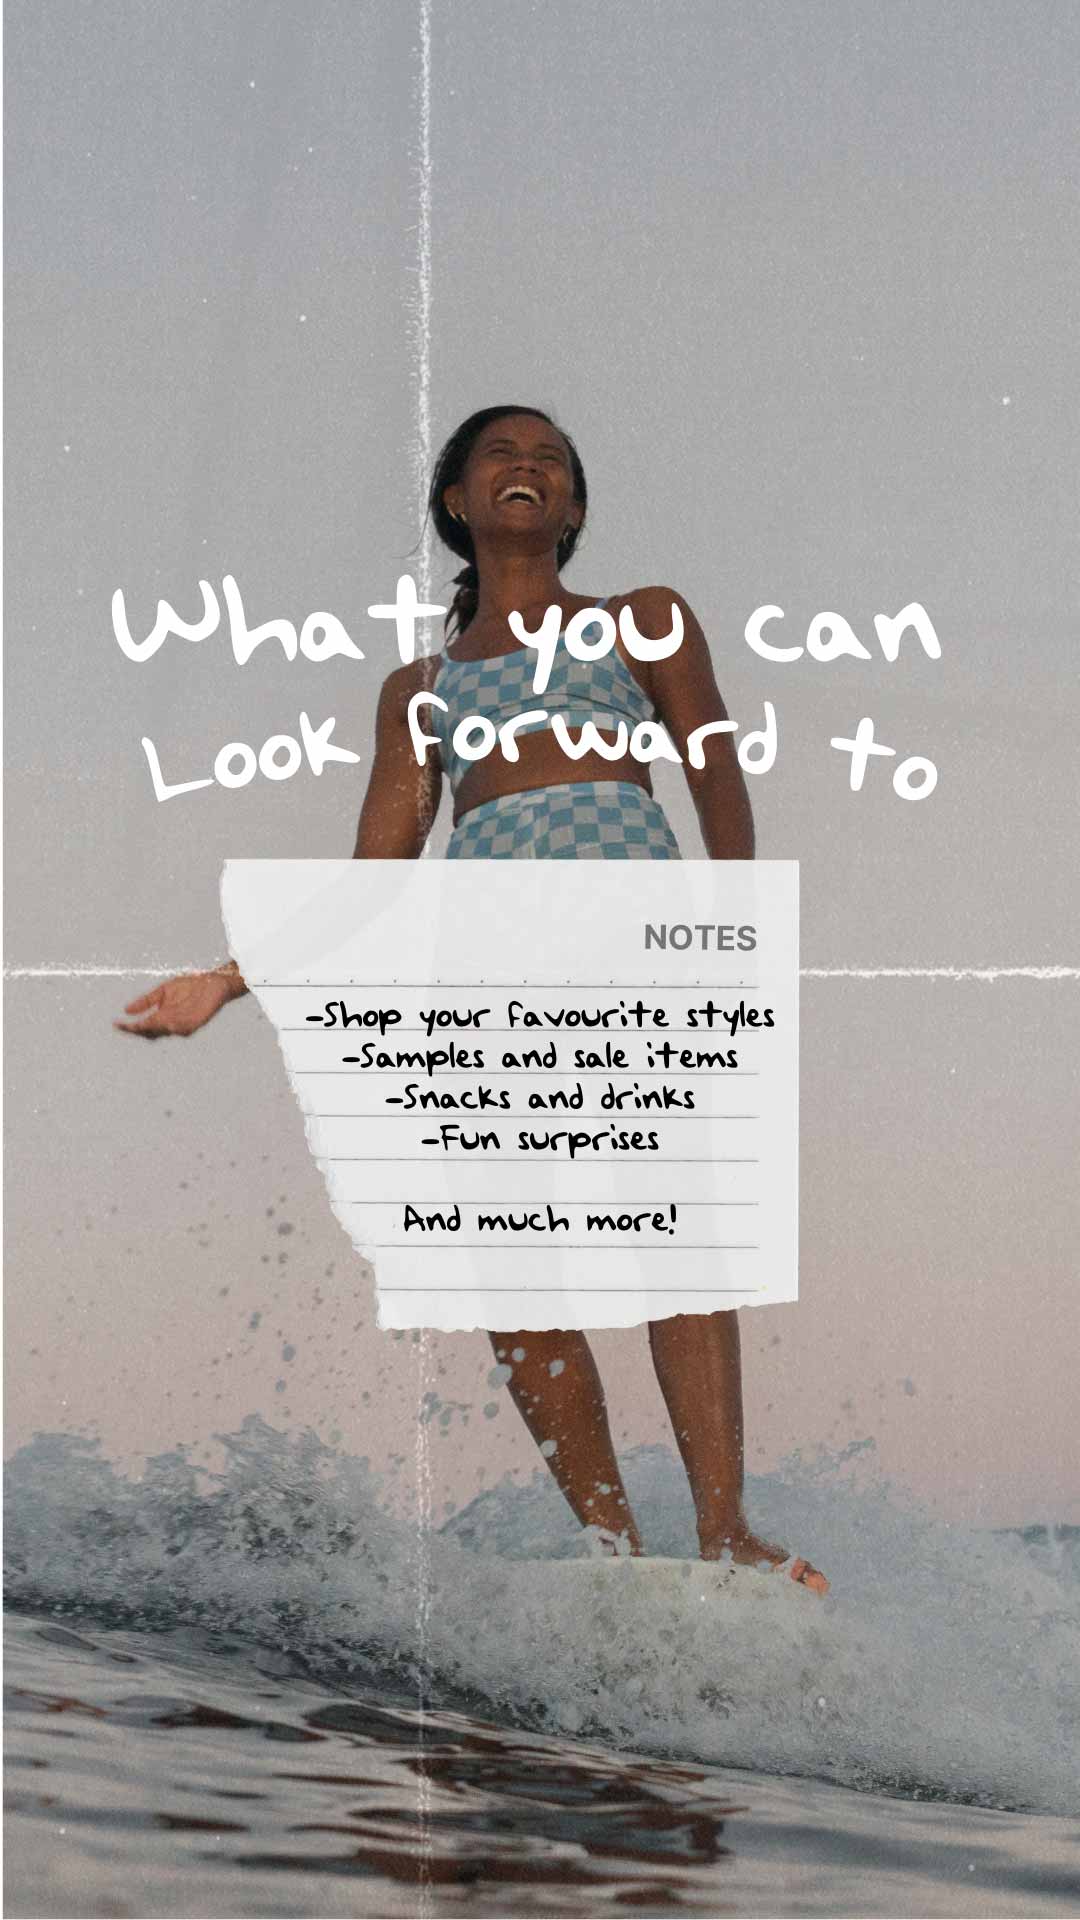 image of a woman surfing with text on the image with information about the pop up store